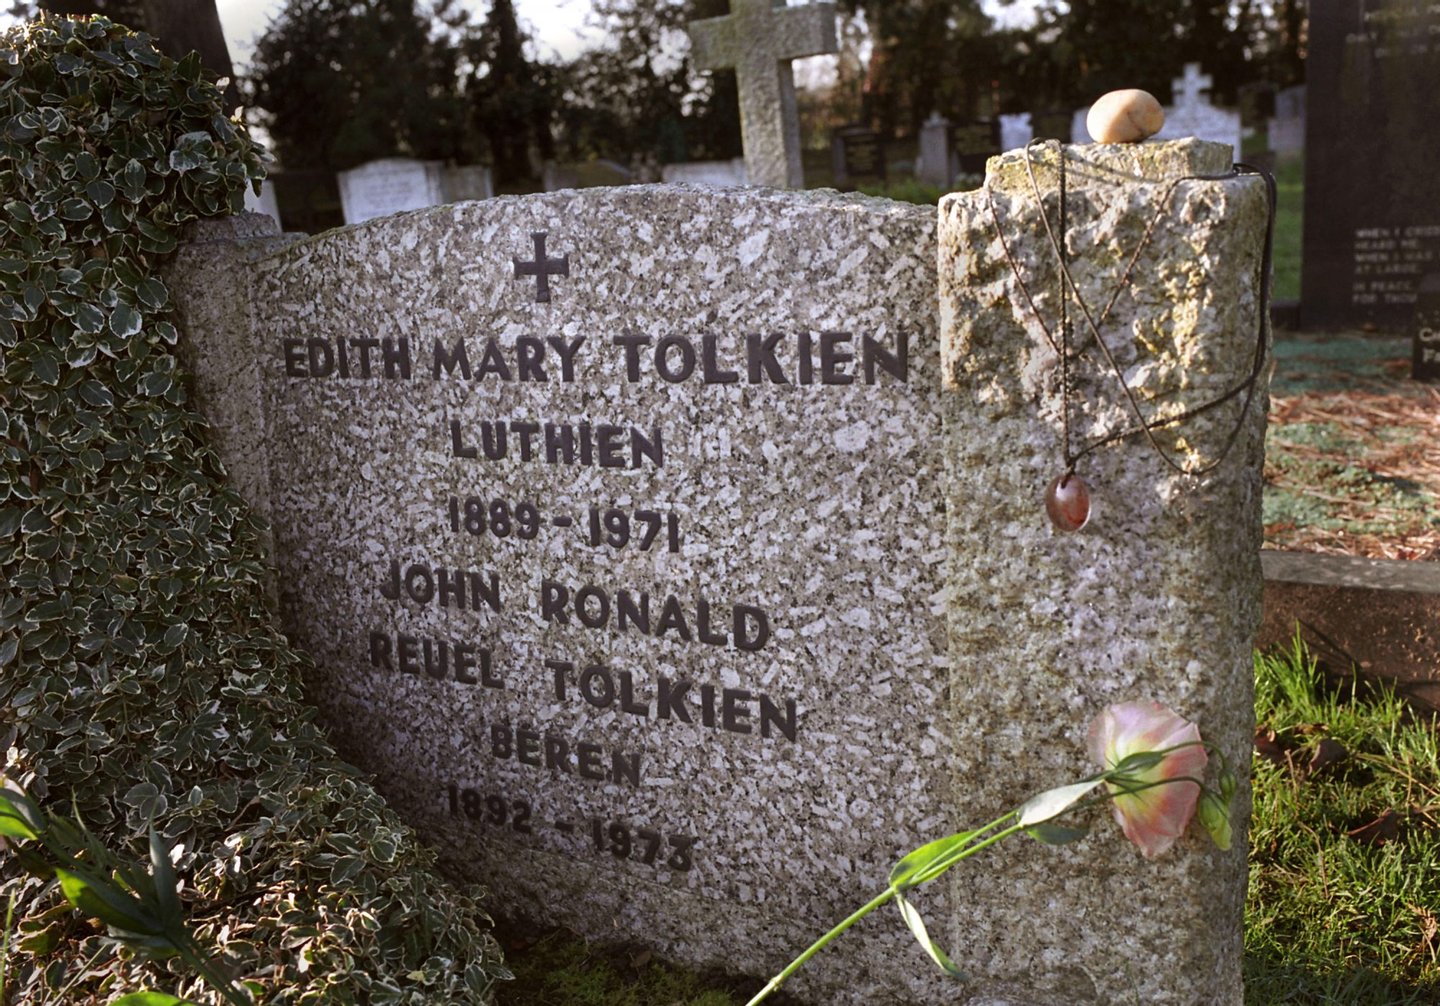 398729 02: The grave of ''Lord of the Rings'' author J.R.R. Tolkien and his wife Edith December 15, 2001 at a cemetery in Oxford, England. The first movie of the trilogy based on the Tolkien novels will be released worldwide December 19, 2001. (Photo by Graham Barclay/BWP Media/Getty Images)